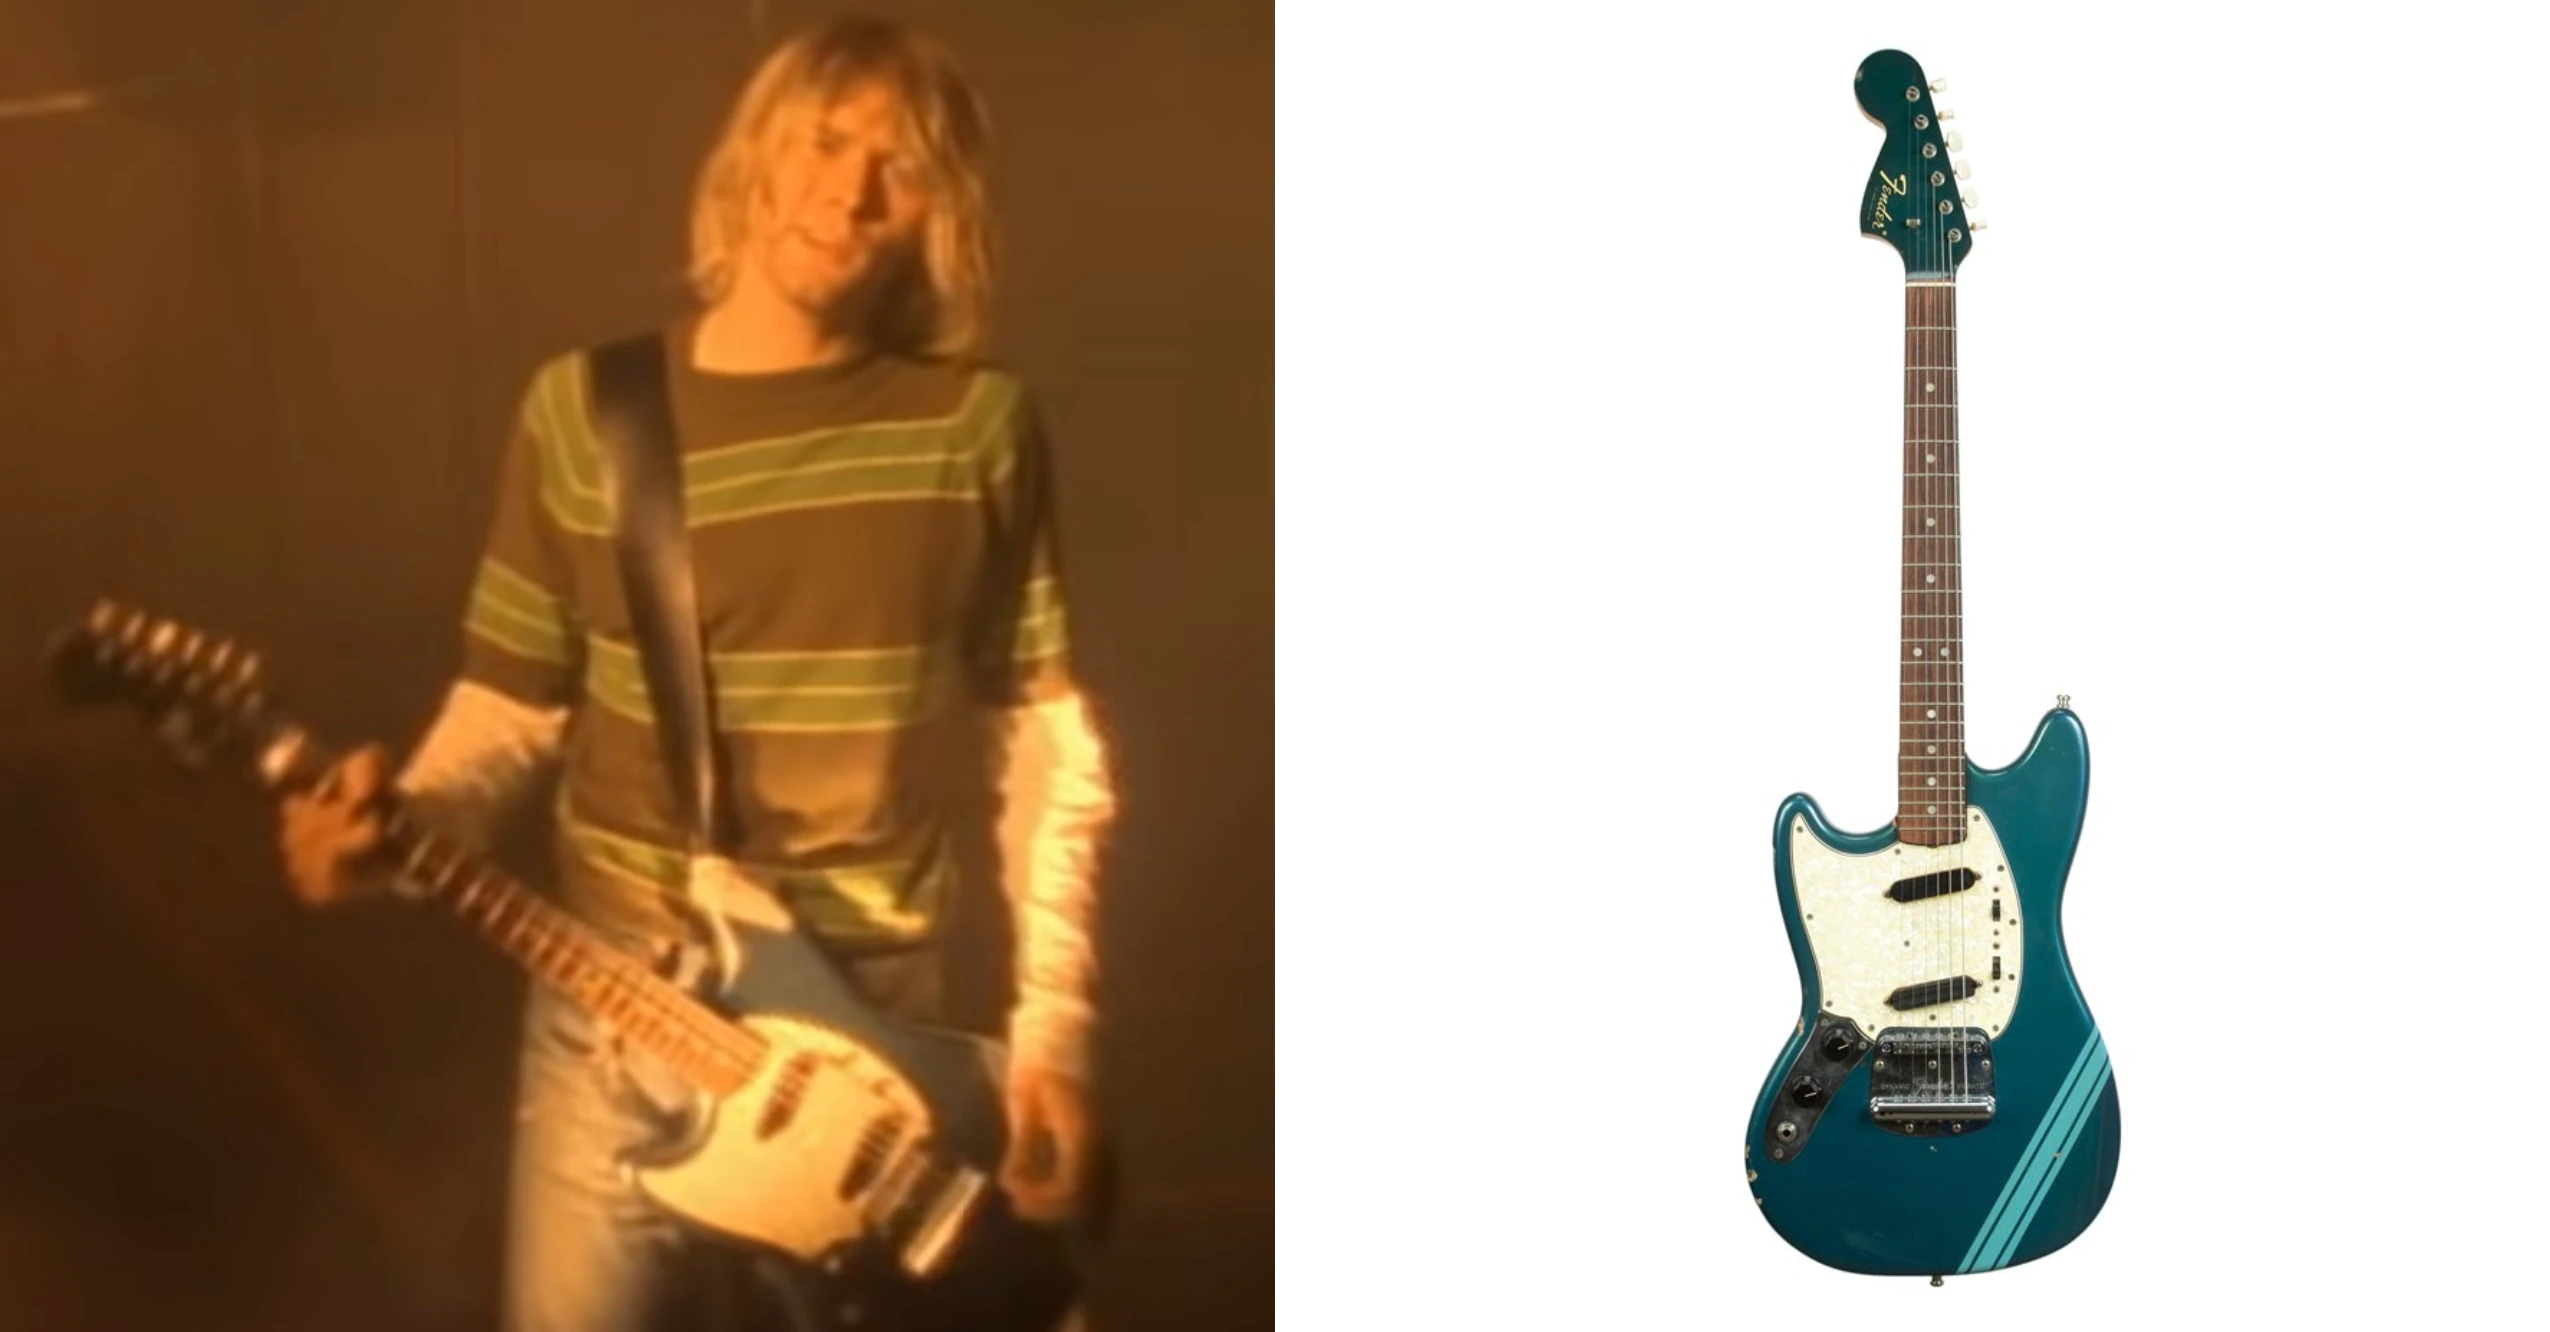 Kurt Cobain’s ‘Smells Like Teen Spirit’ Guitar Could Sell For $800,000 At Auction